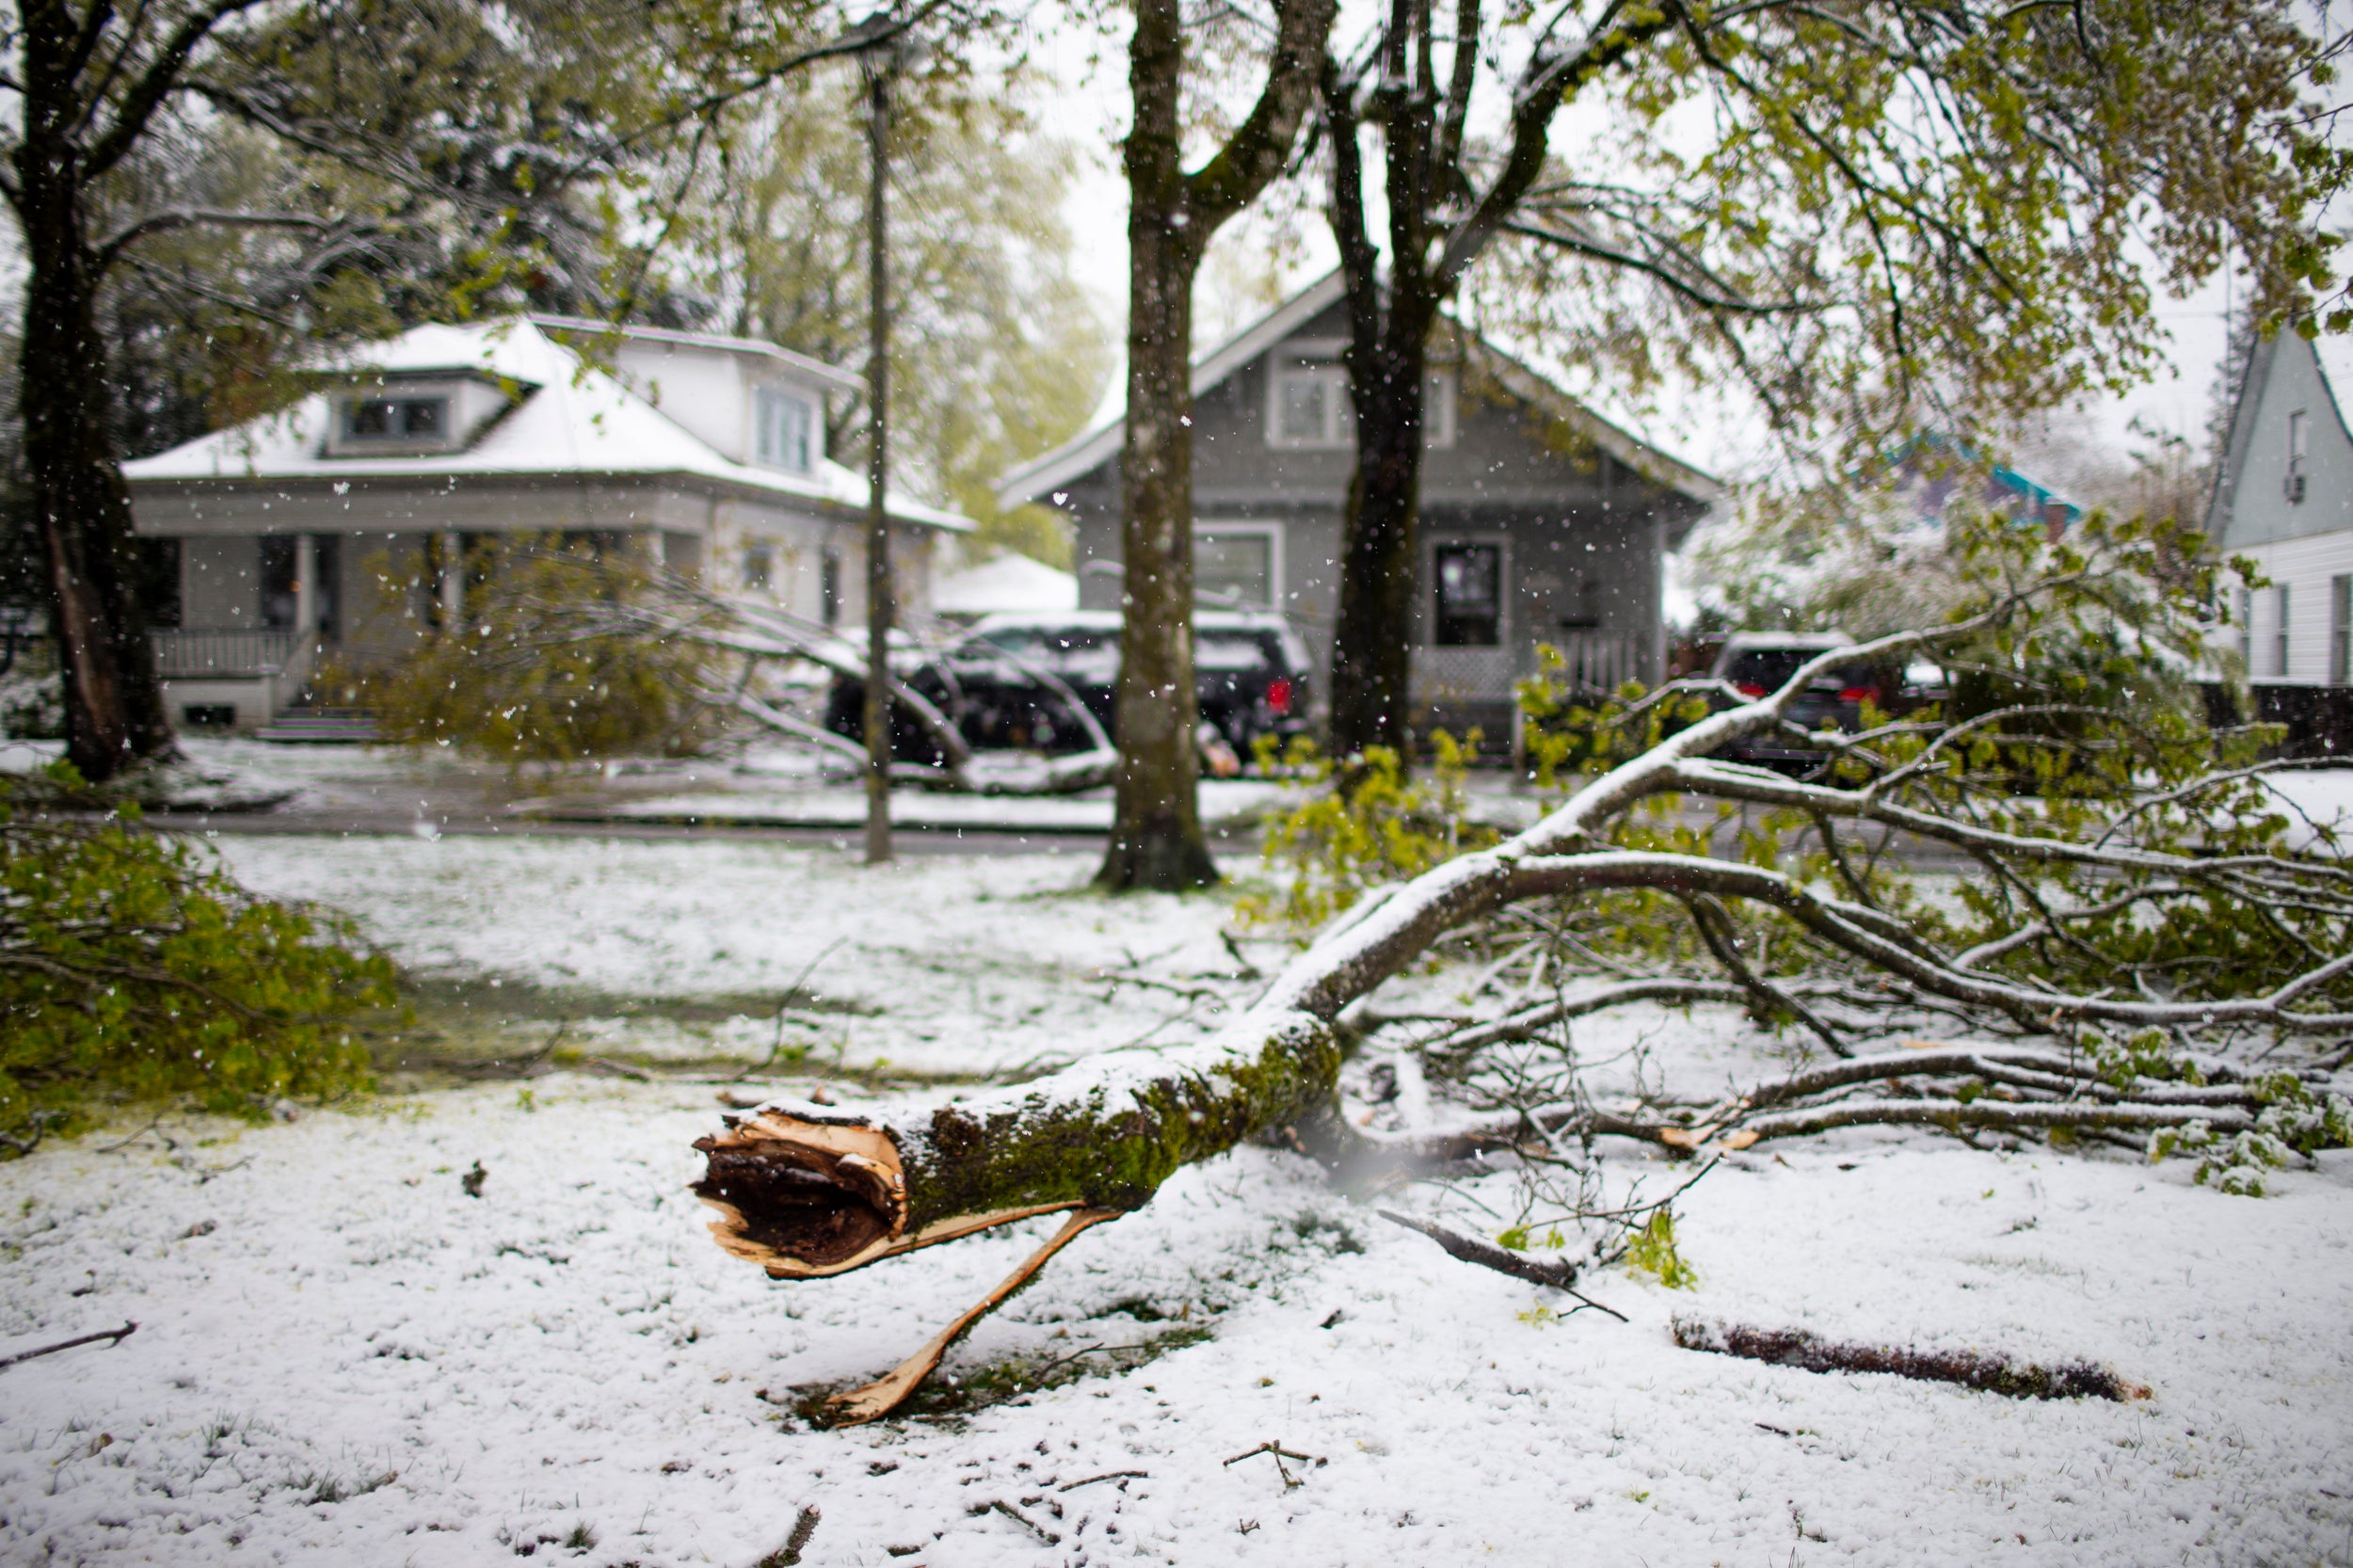 The weight of snow brought down several large tree branches on SE 72nd Ave., just north of Foster. Several inches of snow fell in the Portland, Ore., area on Monday, April 11, 2022, the latest date the city has seen snow in at least 80 years. (Dave Killen/The Oregonian via AP)